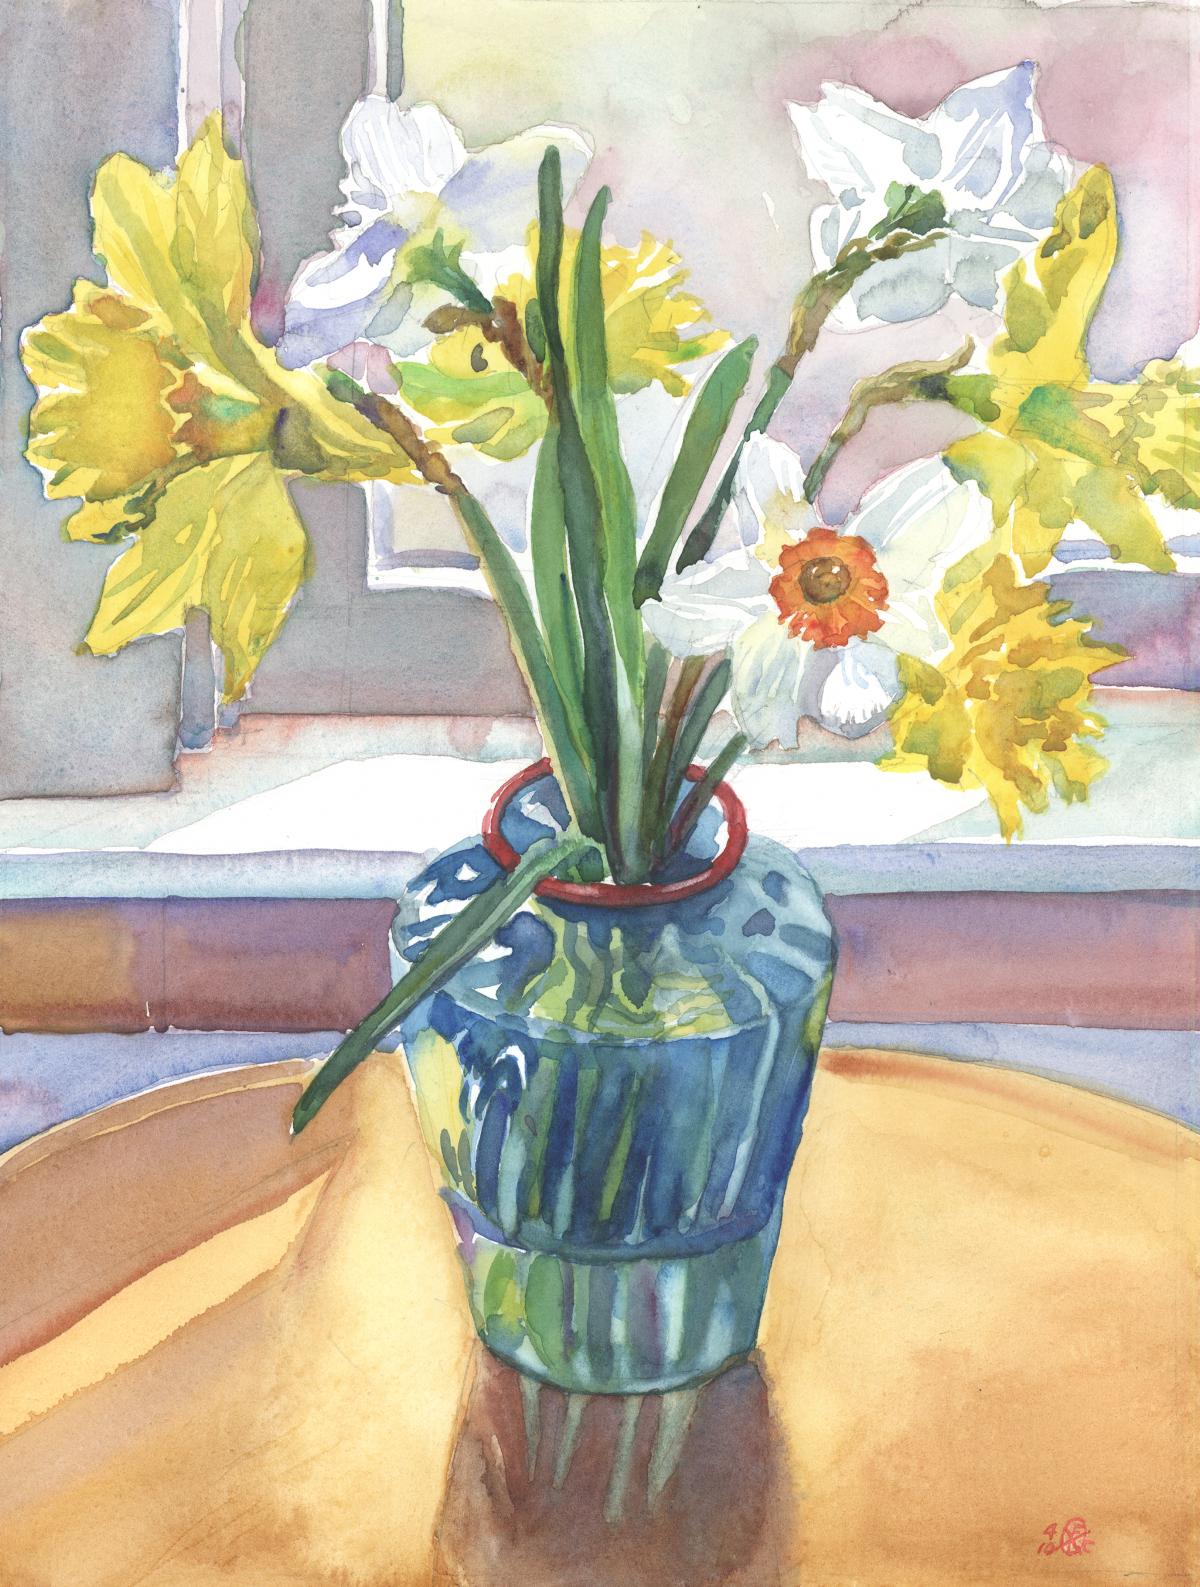 Jonquil Septet - watercolor floral painting by Frank Costantino